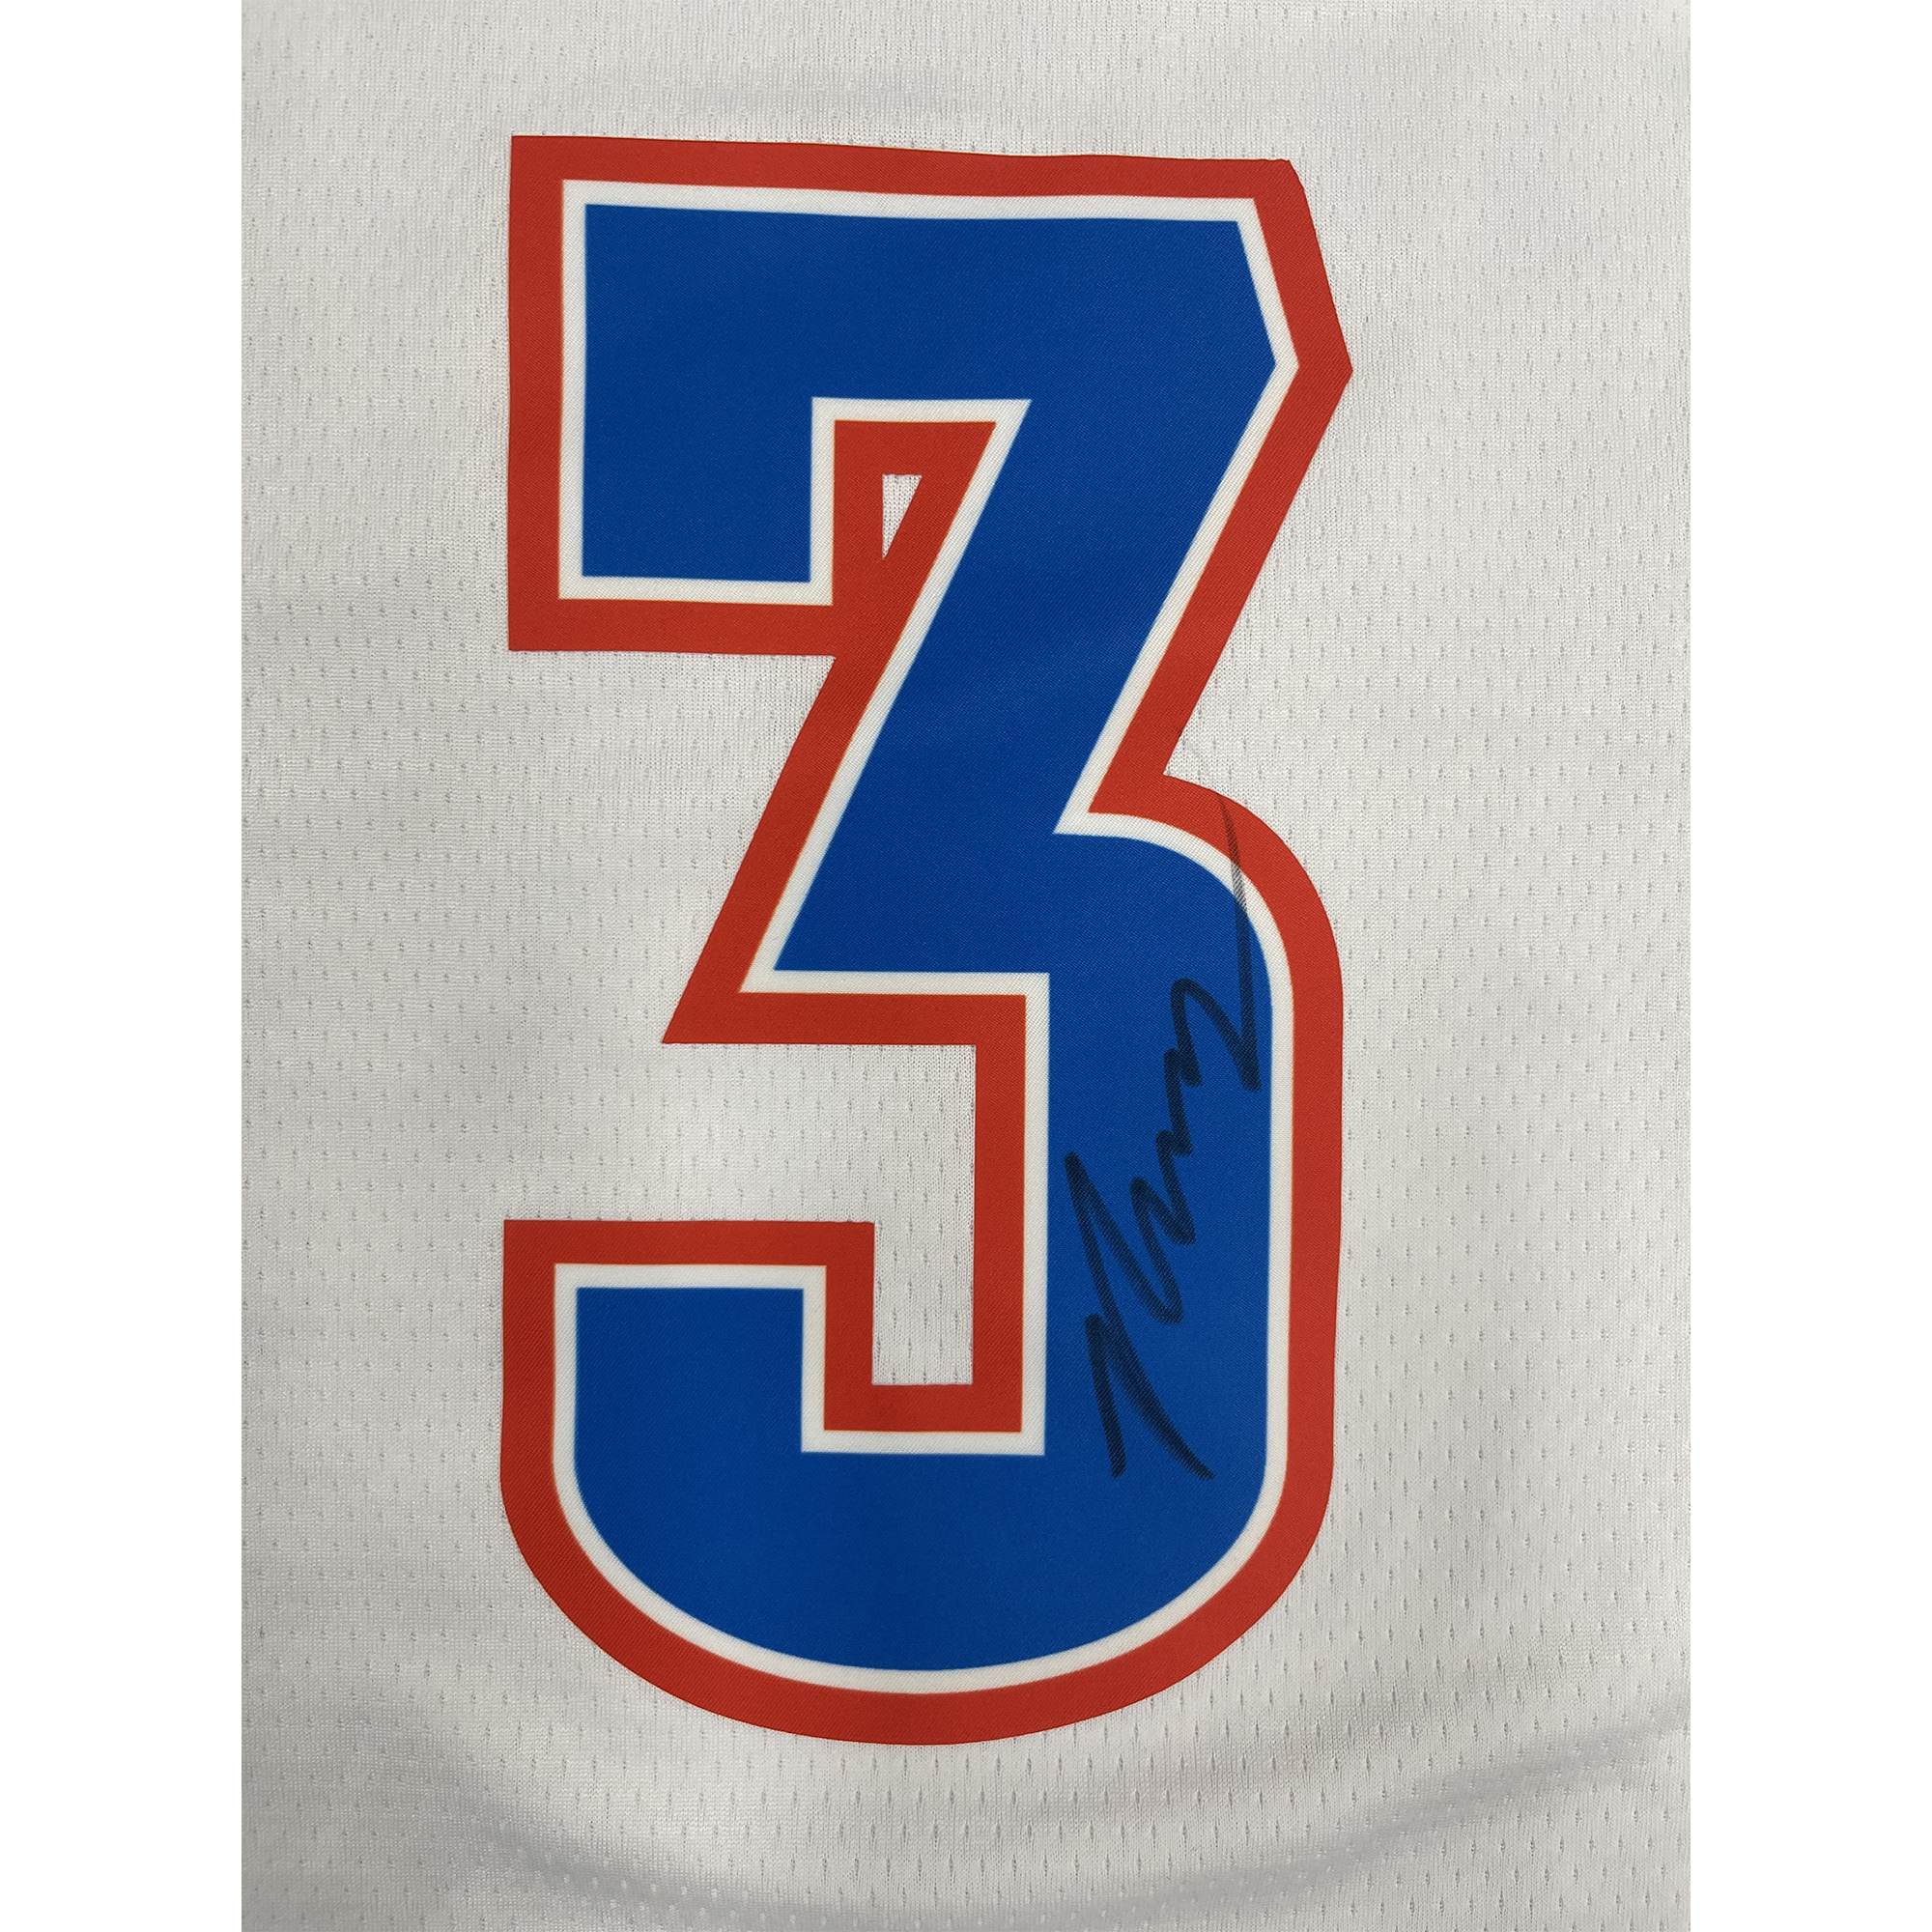 Framed Autographed/Signed Josh Giddey 33x42 White Authentic Jersey PSA –  Super Sports Center